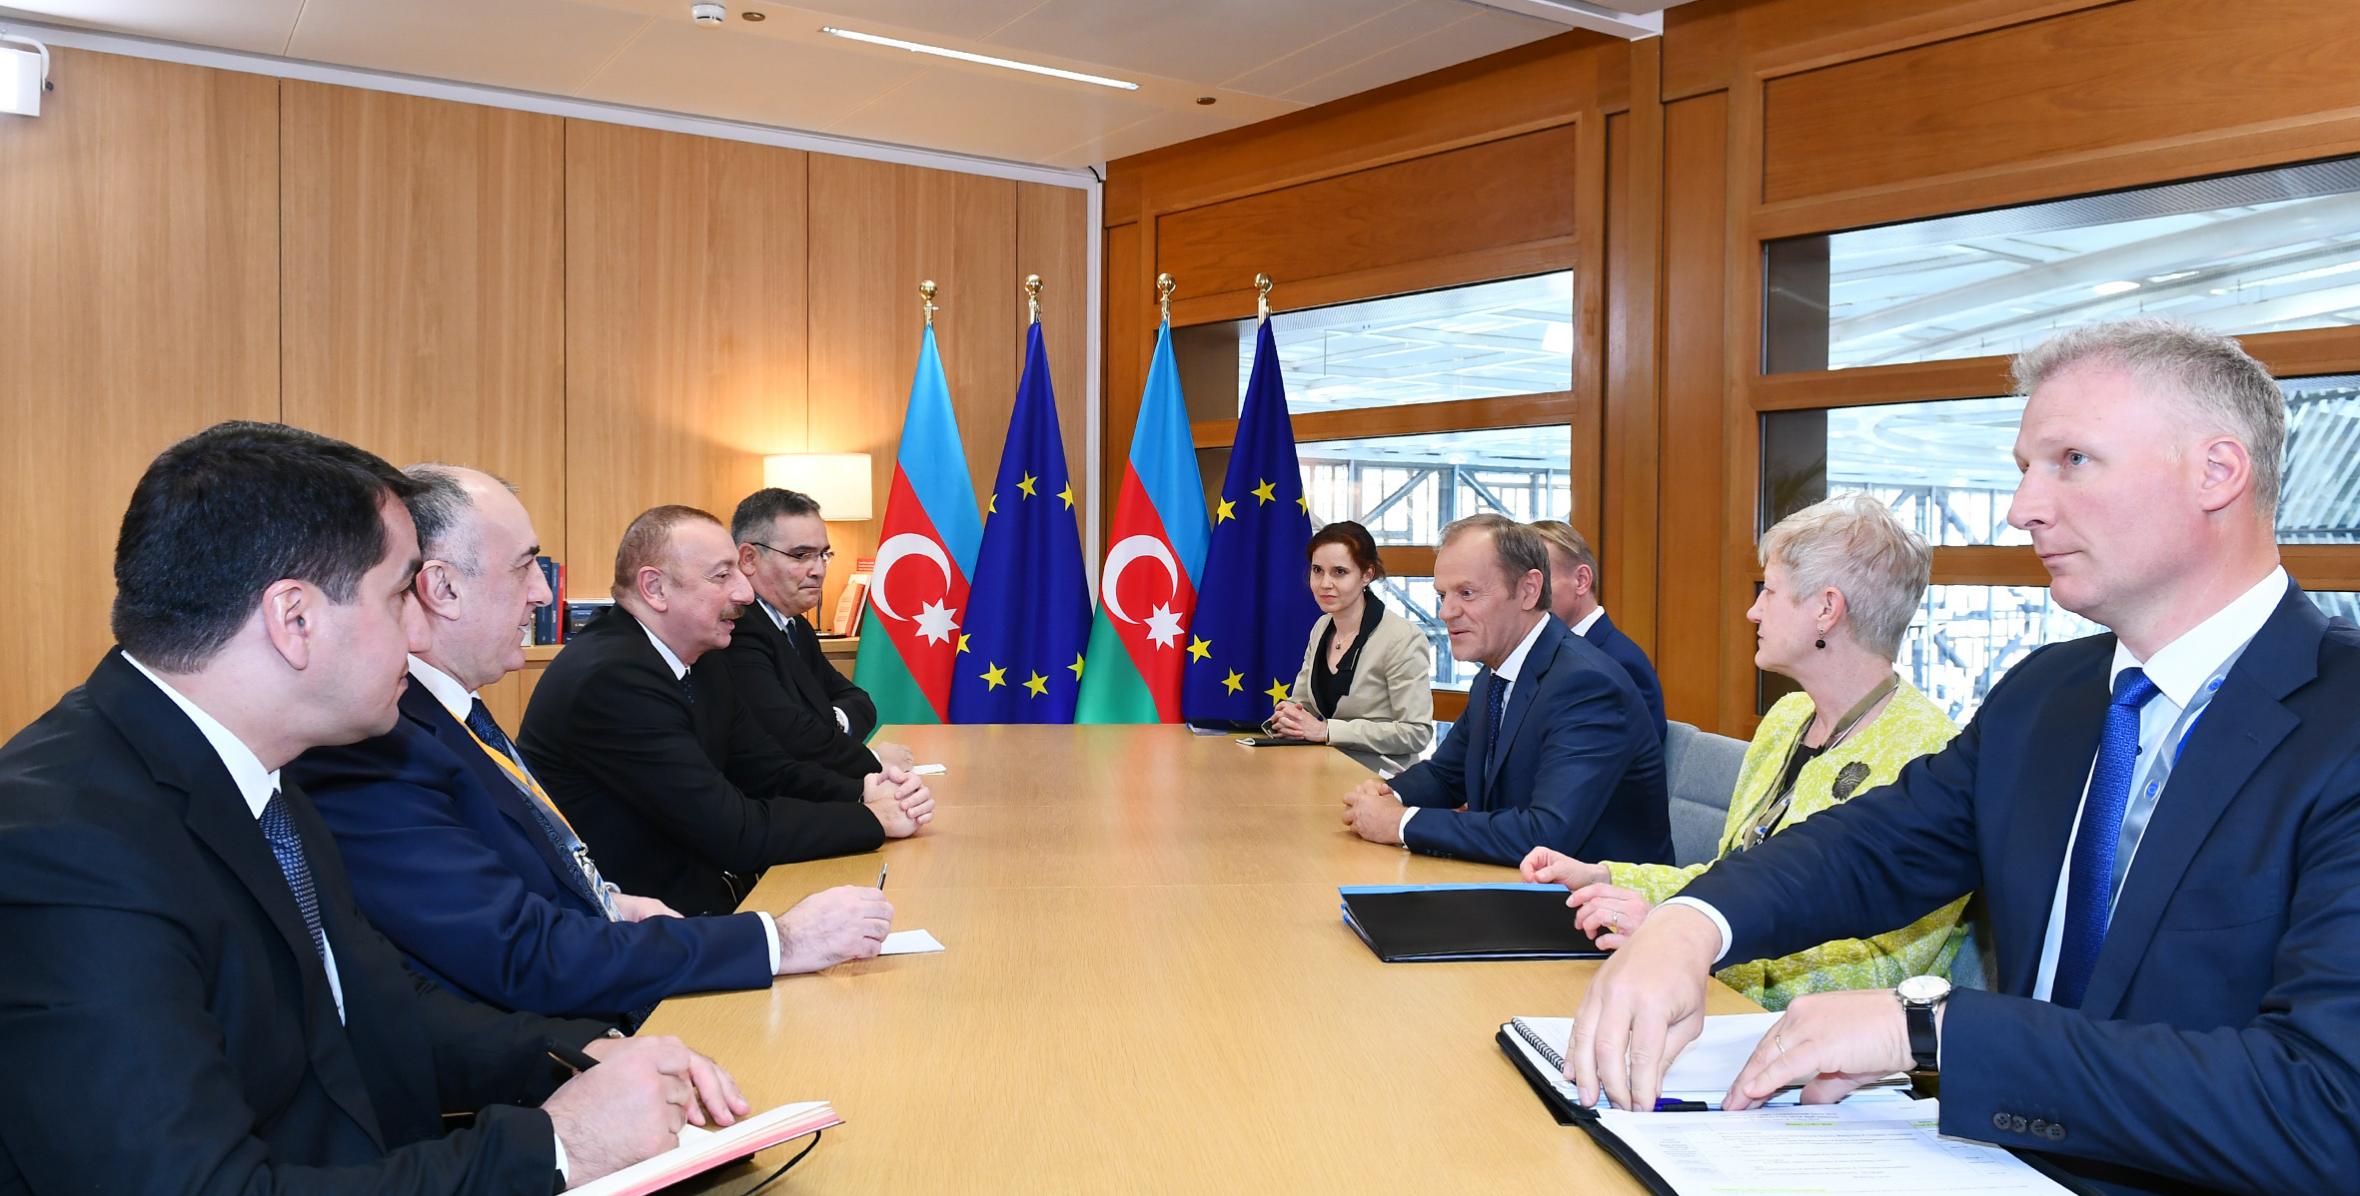 Ilham Aliyev met with President of European Council Donald Tusk